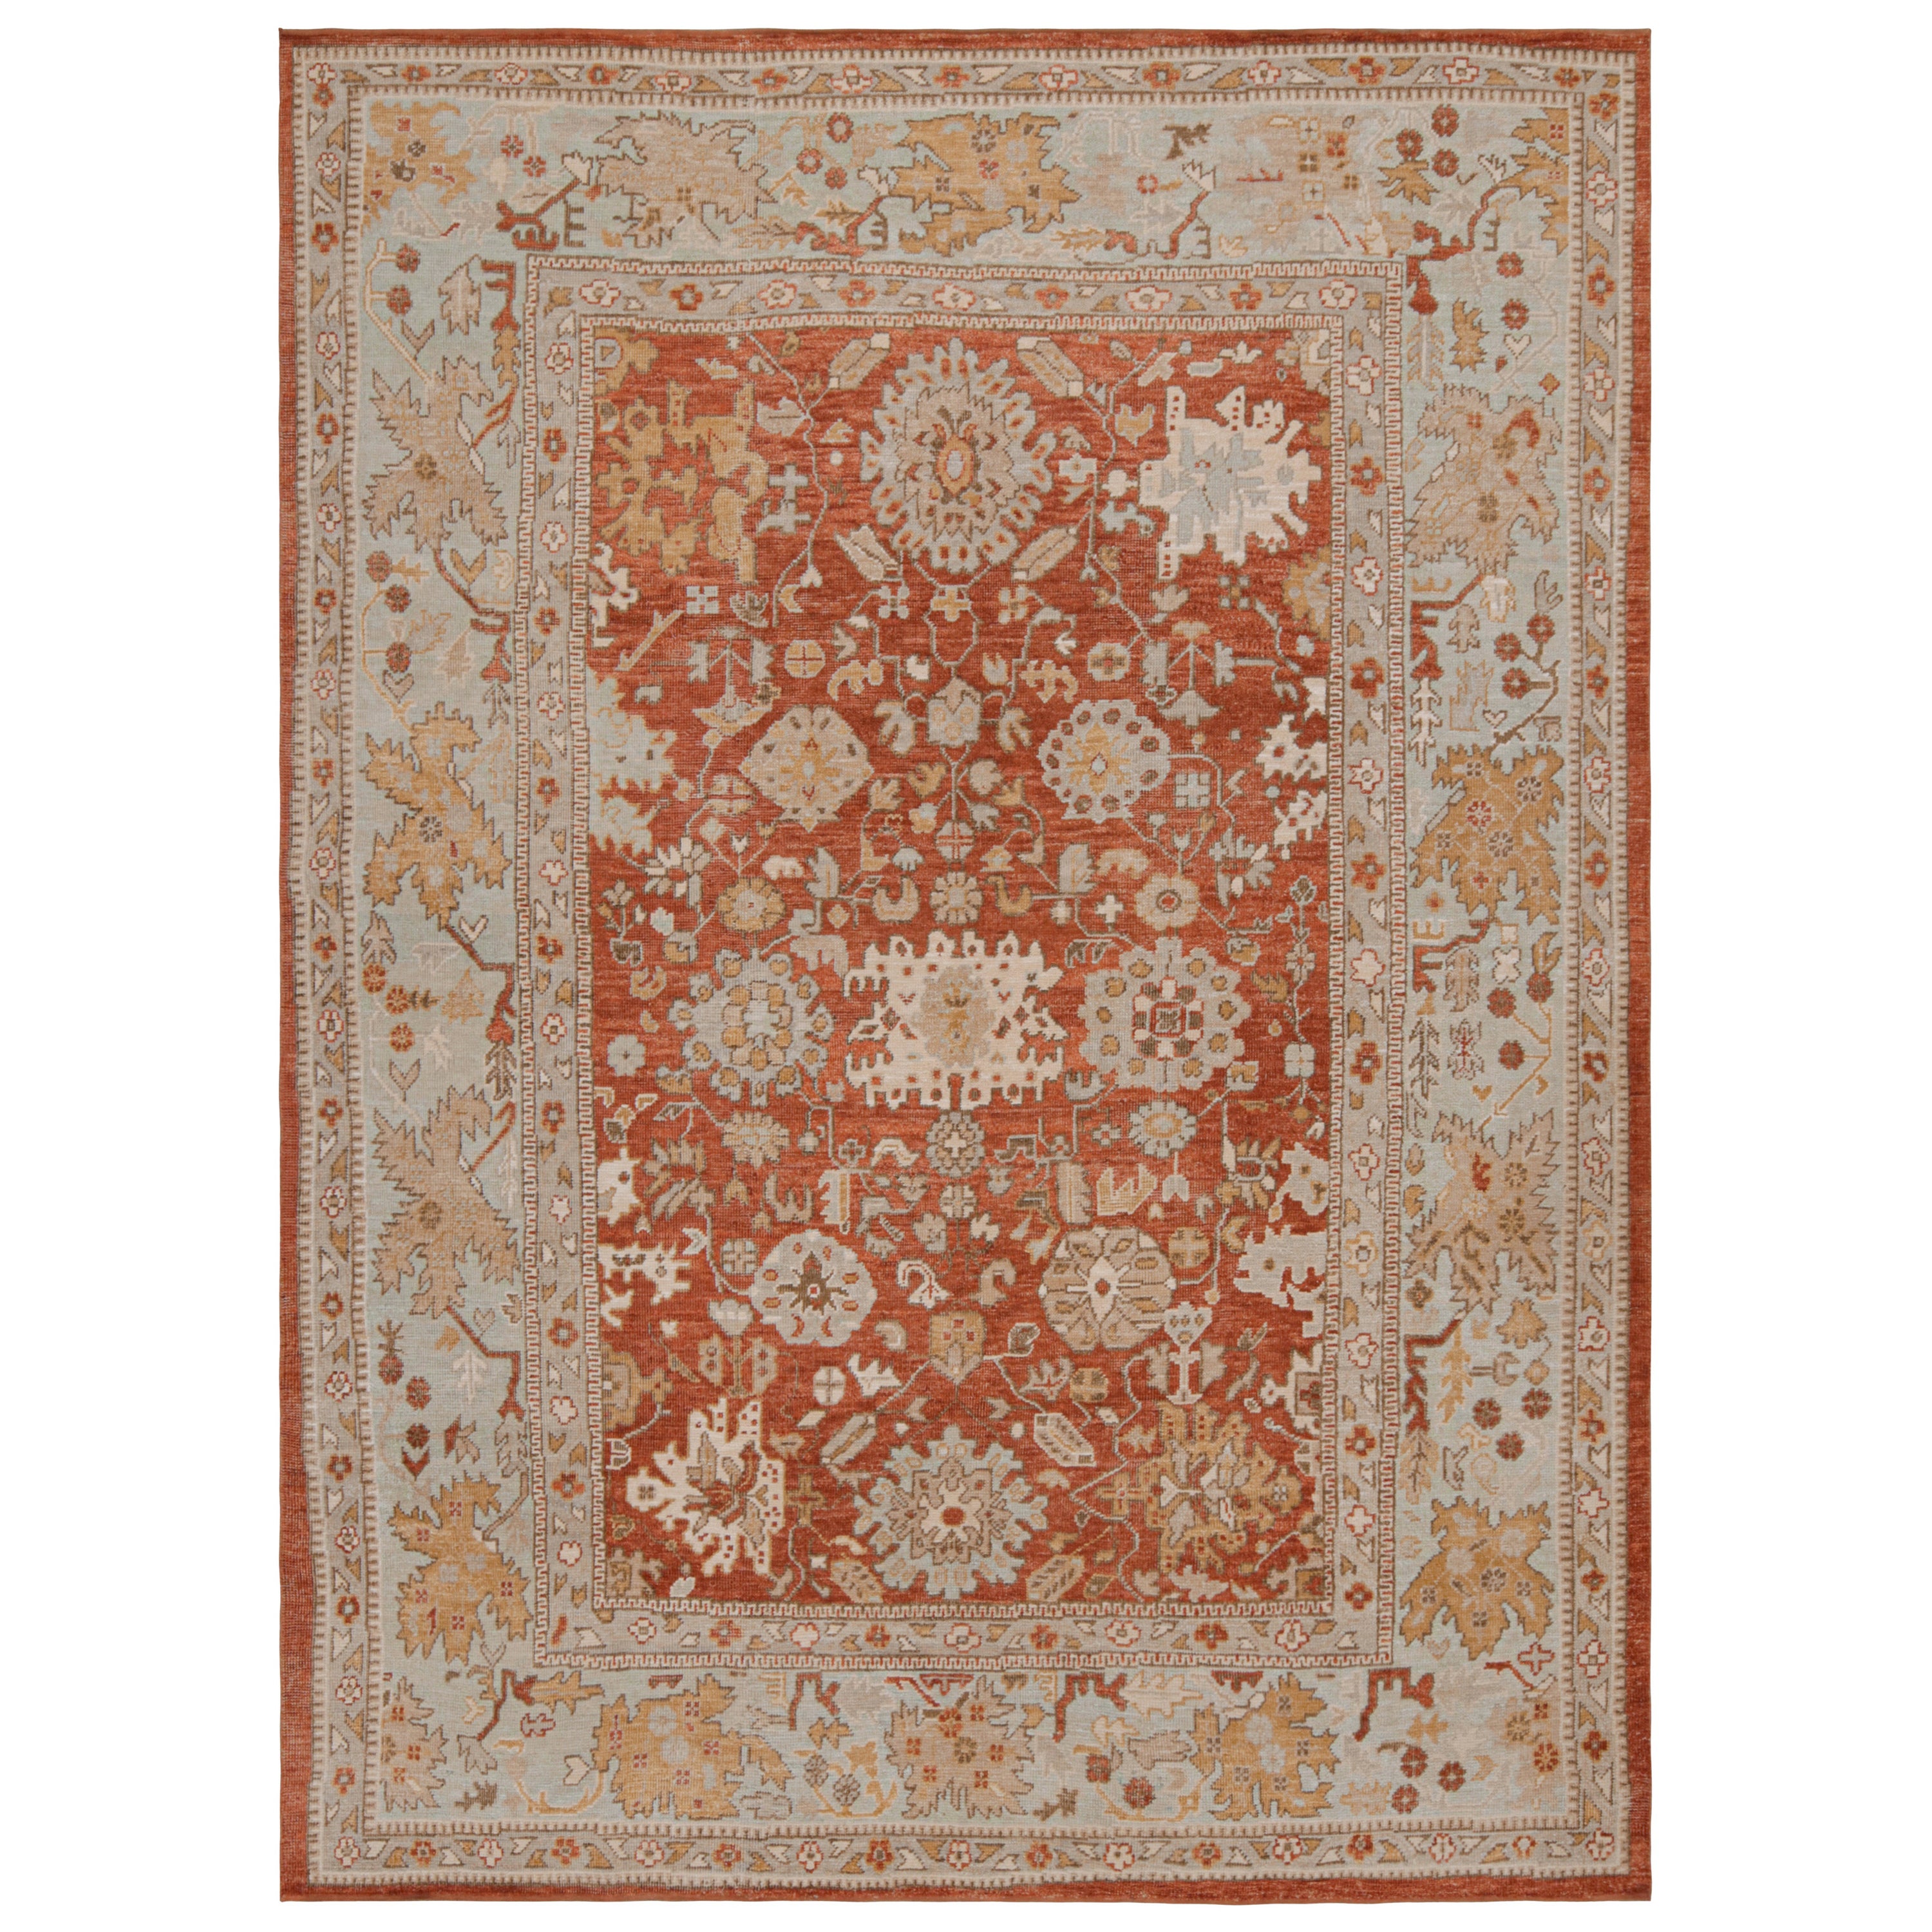 Rug & Kilim’s Oushak style rug in Red, Blue & Brown Floral Patterns